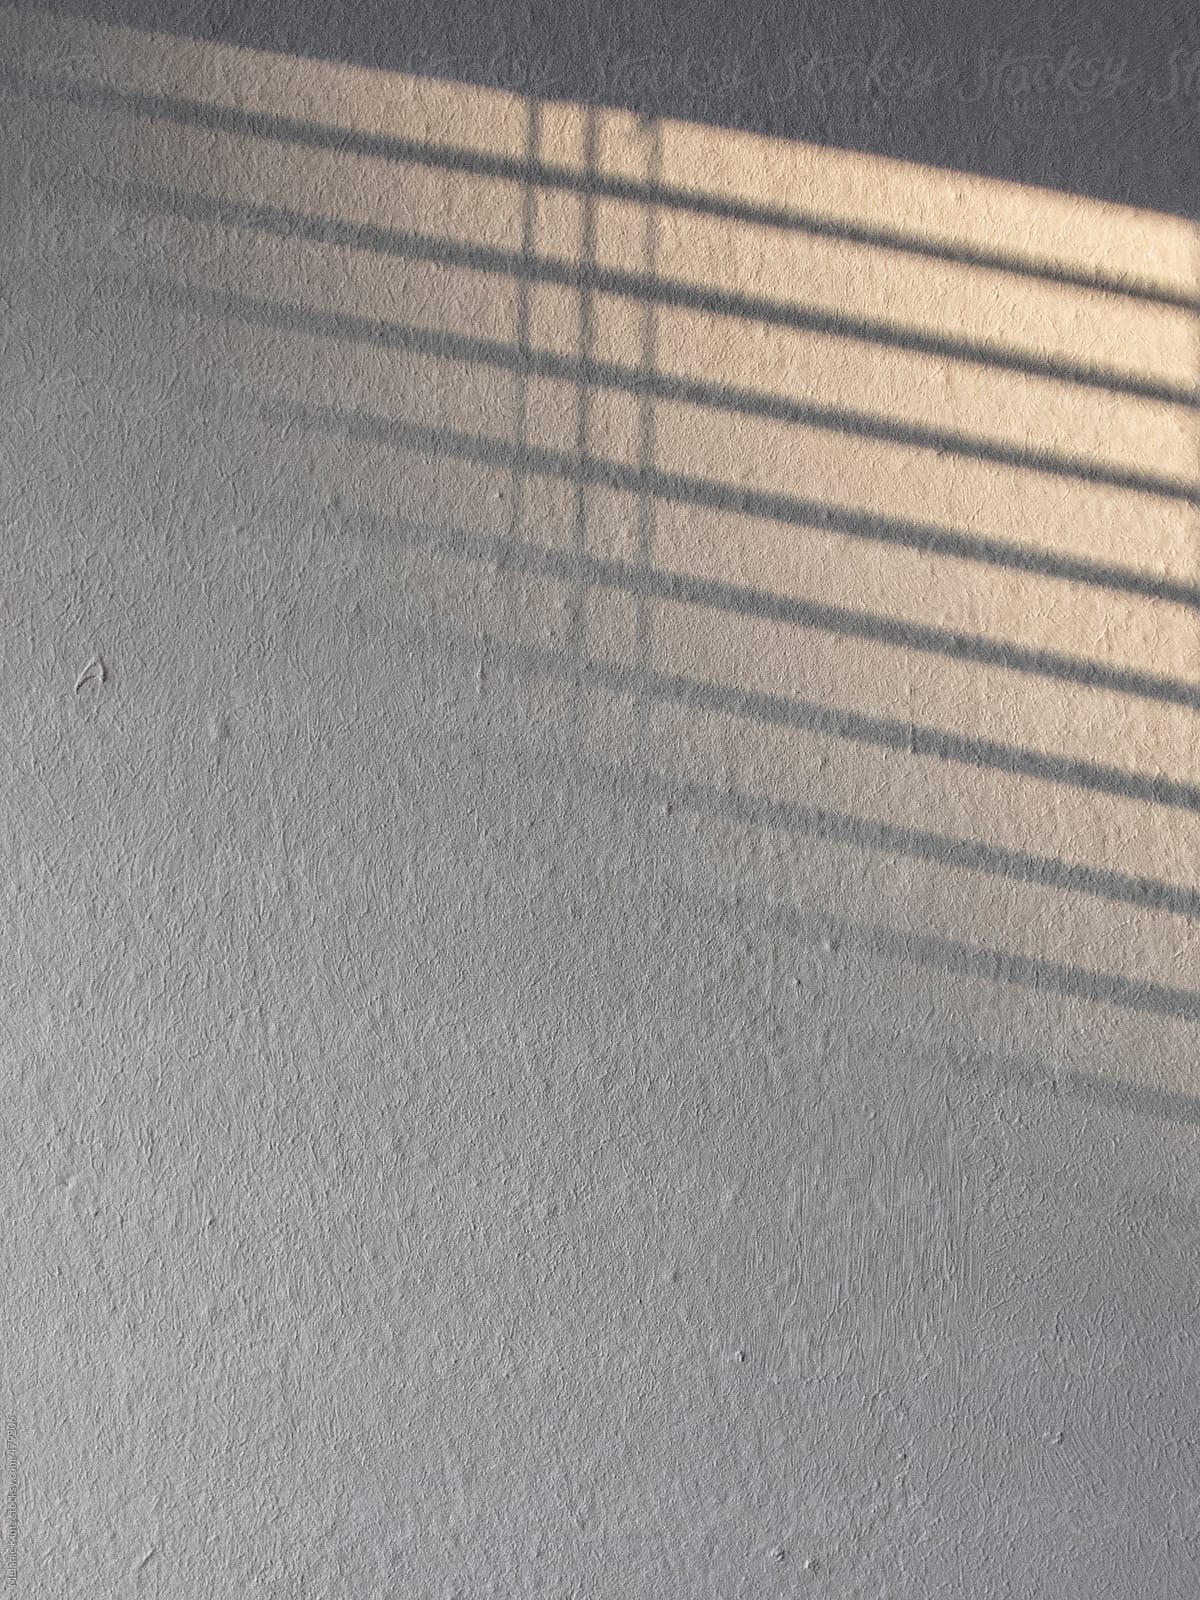 Sunlight coming through a window is being cast on a white wall